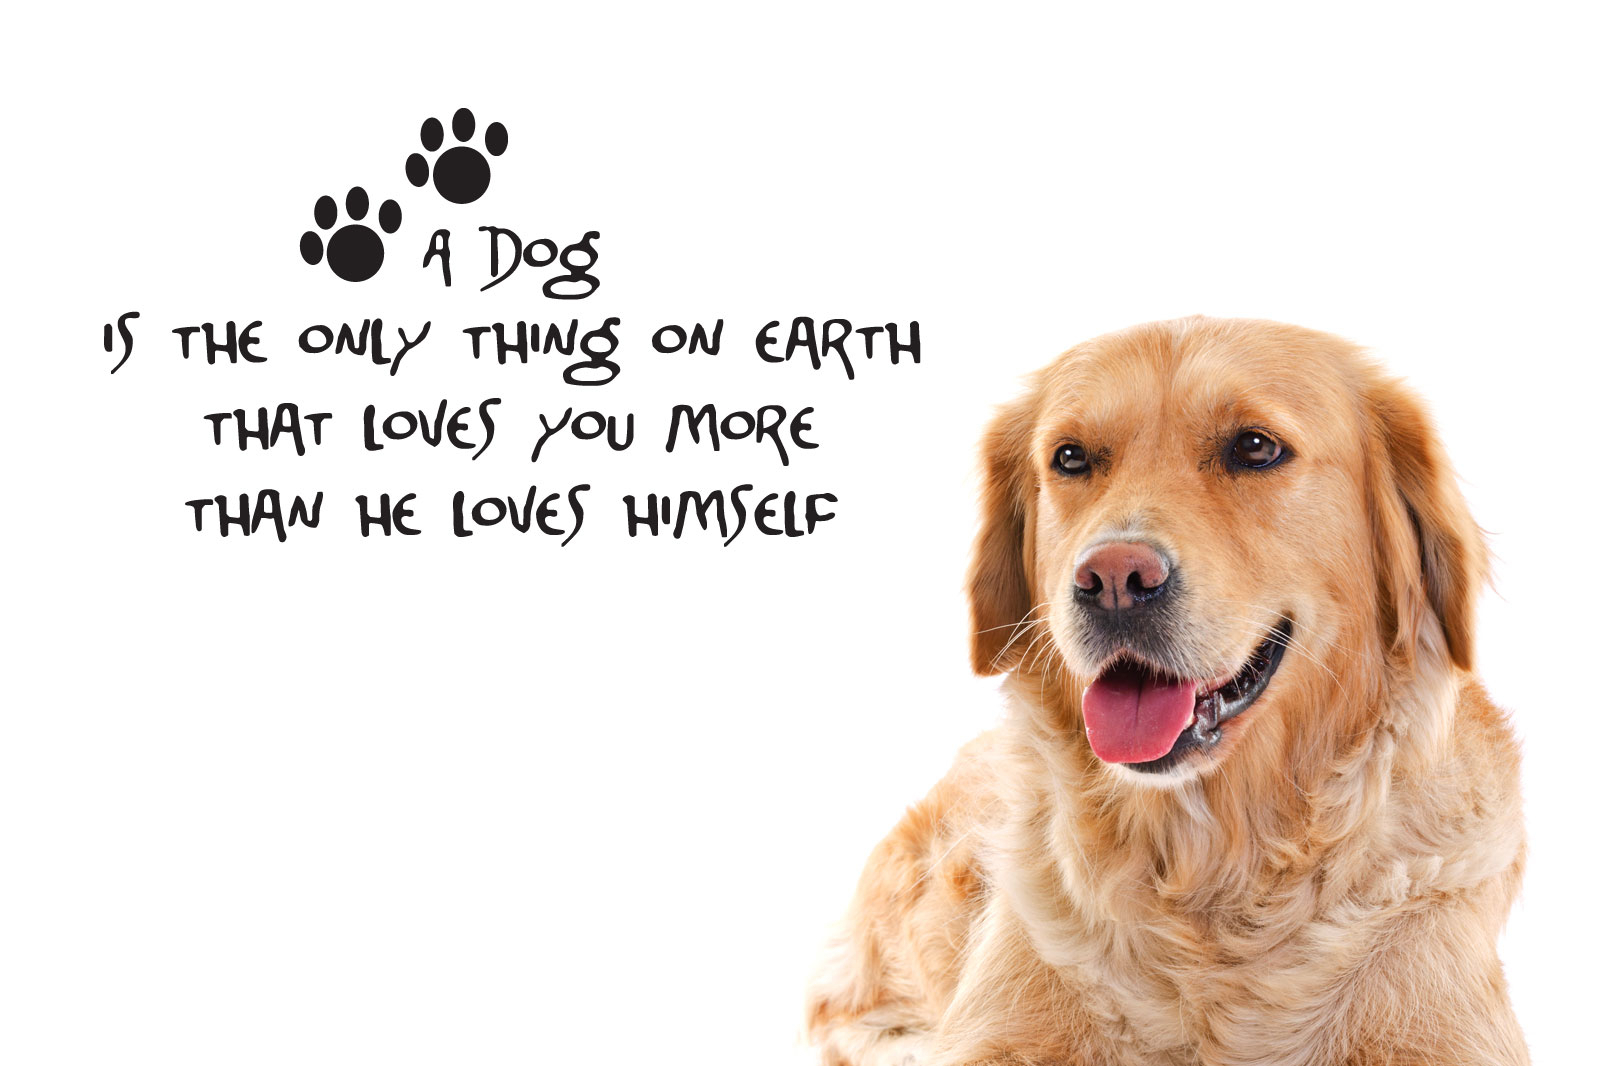 Inspiring Animals Background In High Quality Dog Quotesbrook